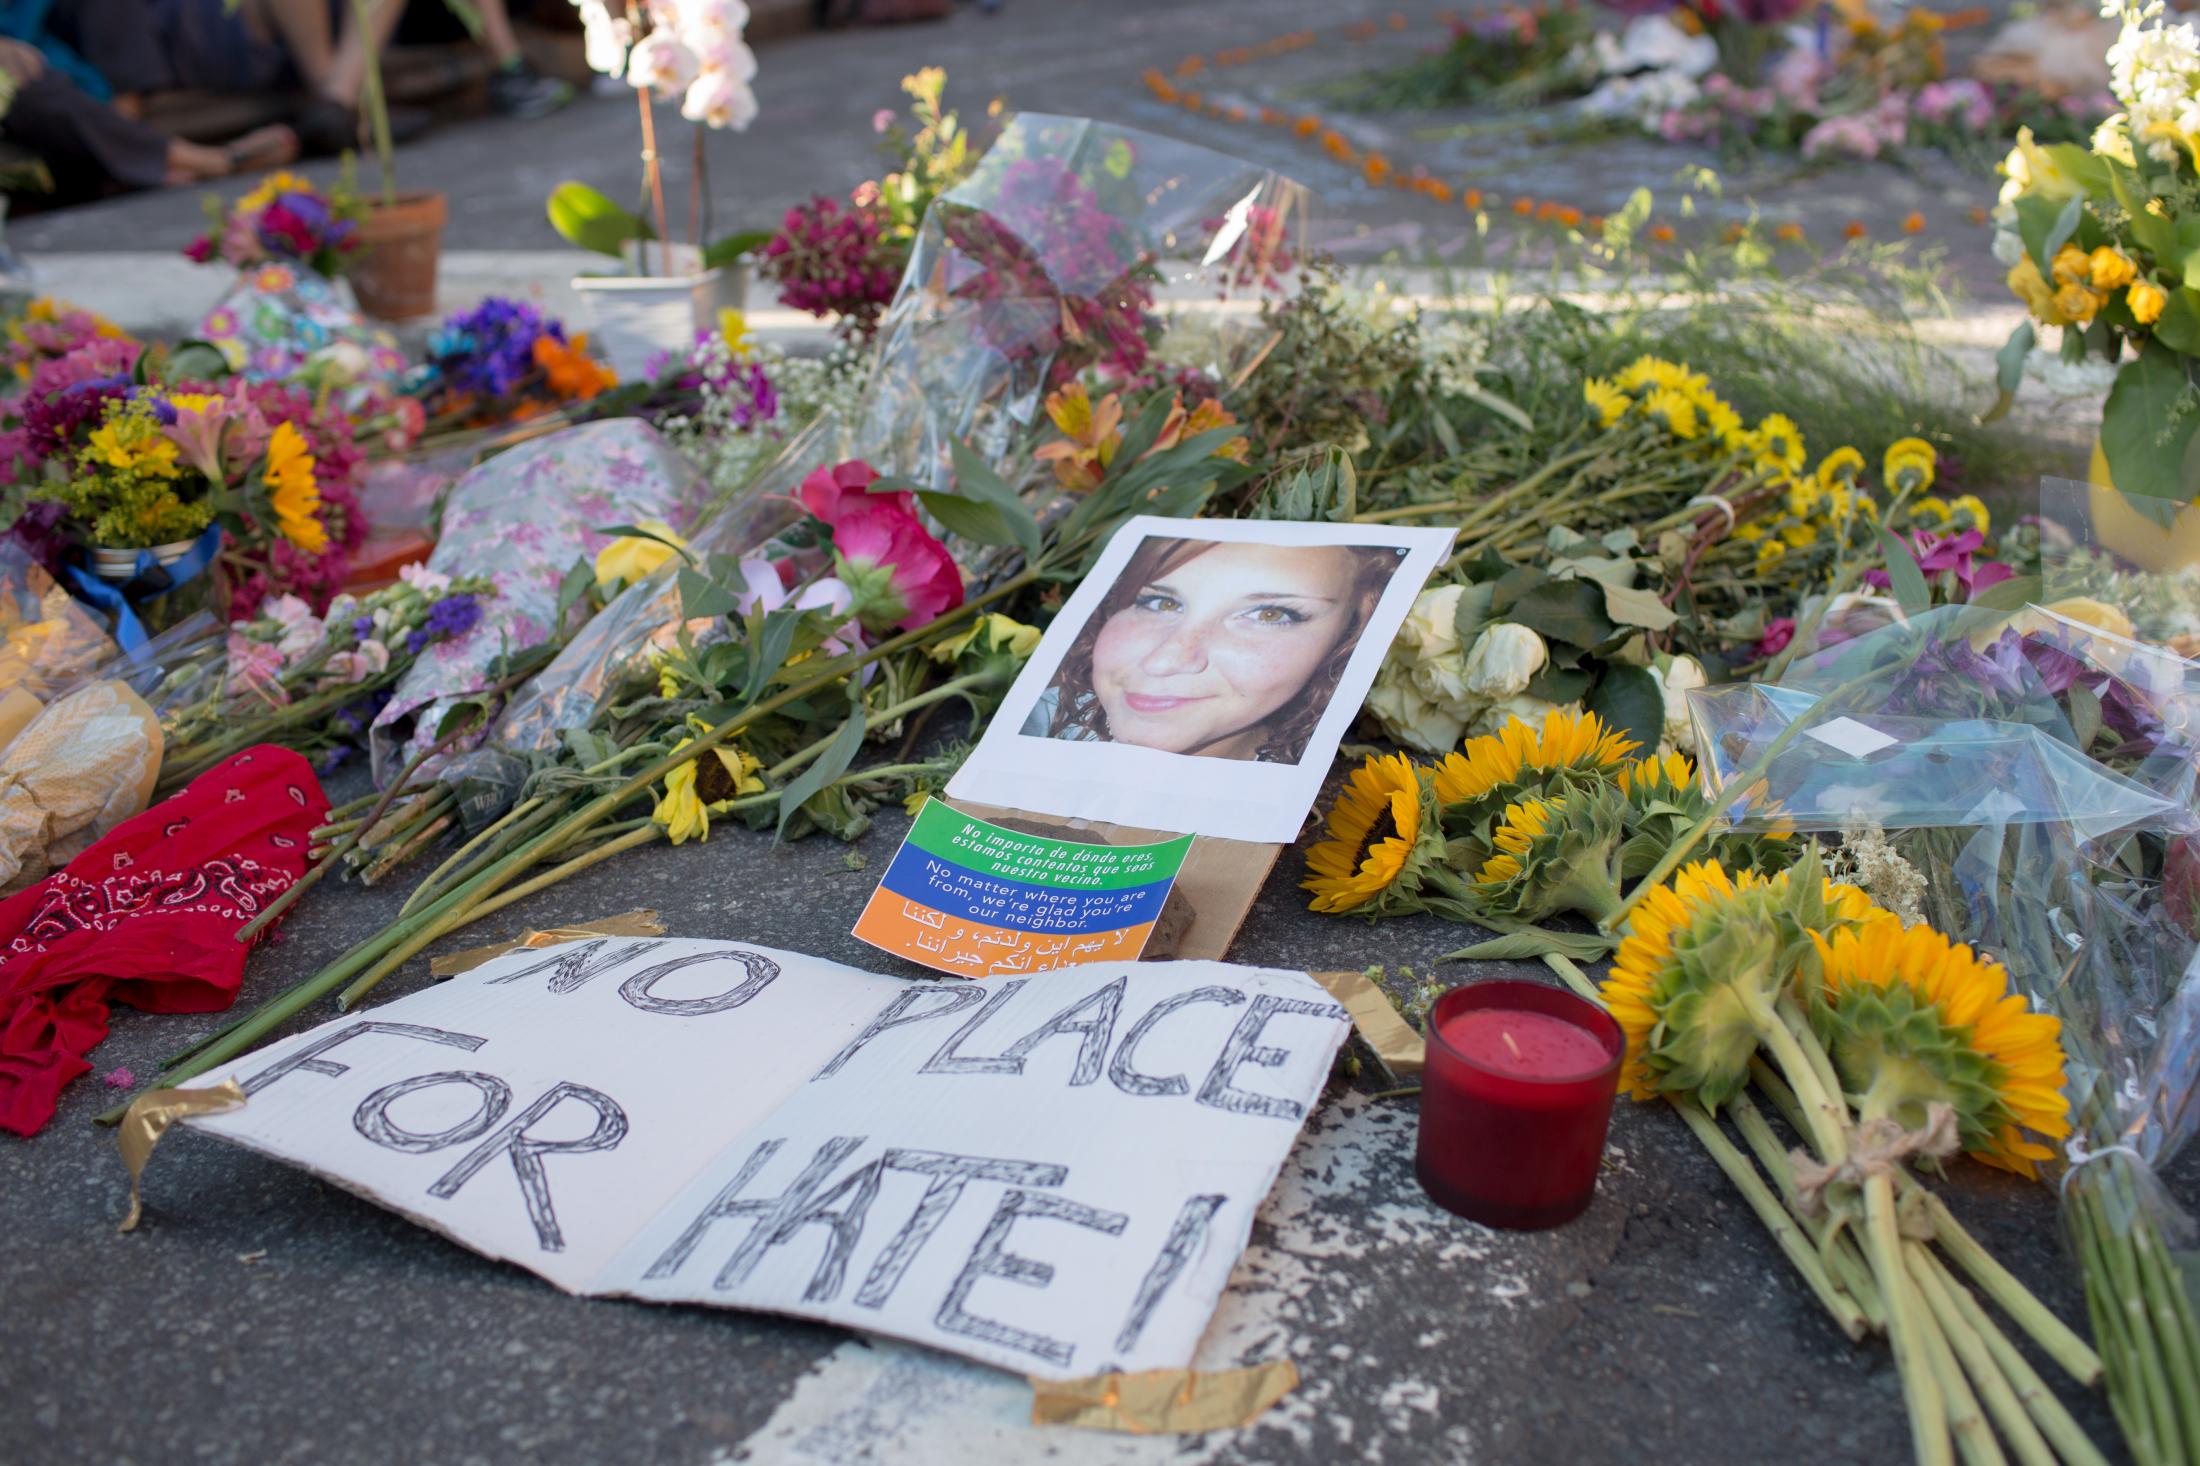 Charlottesville - A photo of Heather Heyer is placed at a memorial for her...